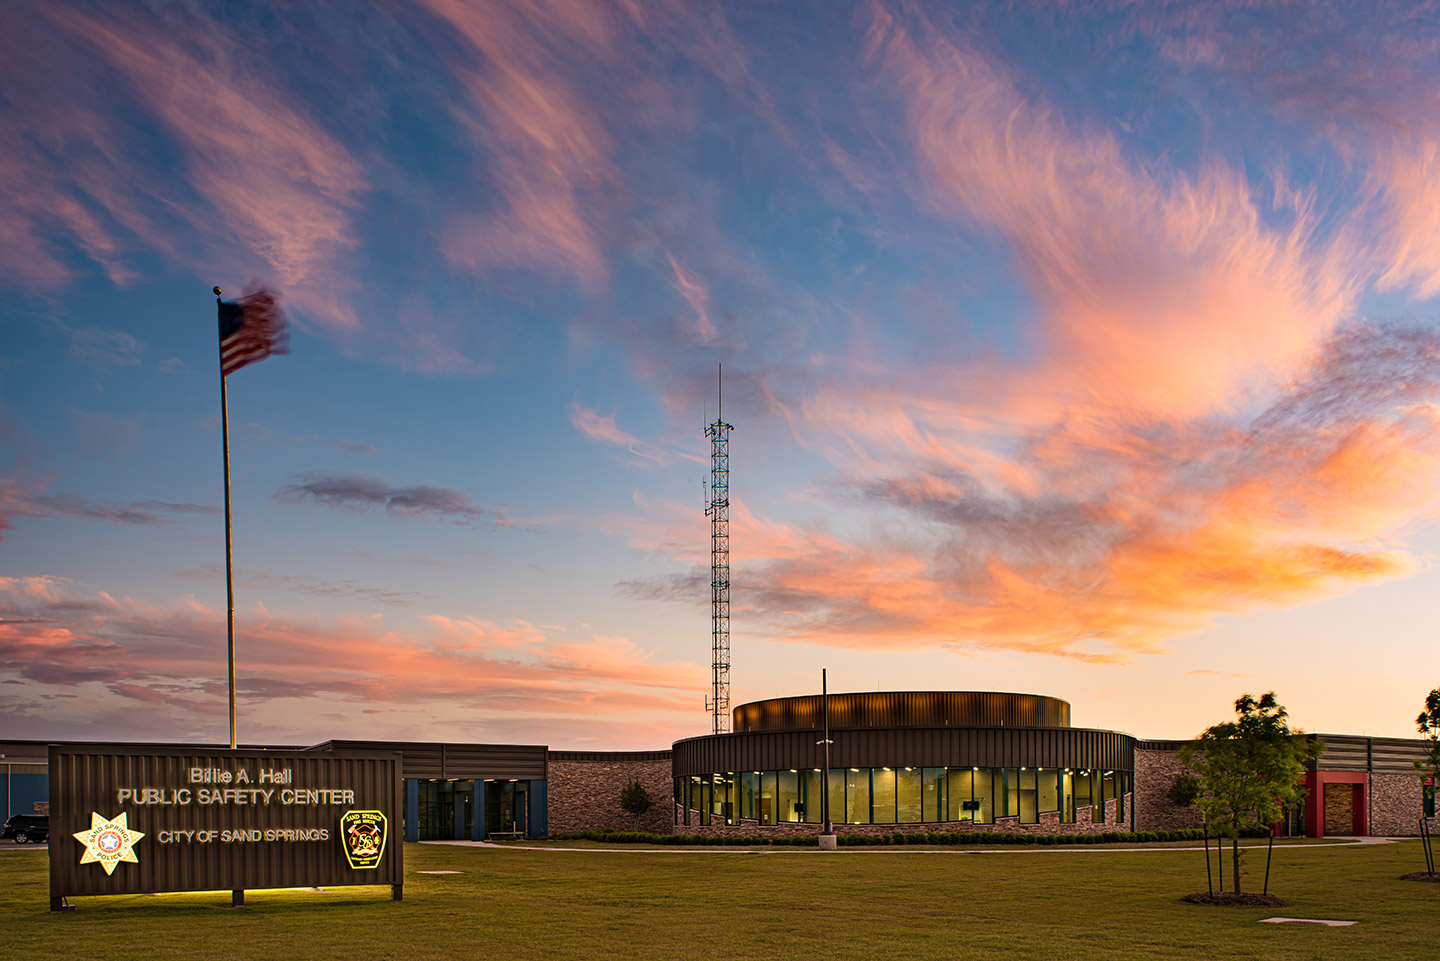 The Billie A. Hall Public Safety Center in Sand Springs, Oklahoma, received the silver award from the Station Design Awards. Photo courtesy of Jon B. Petersen Photography, Inc.